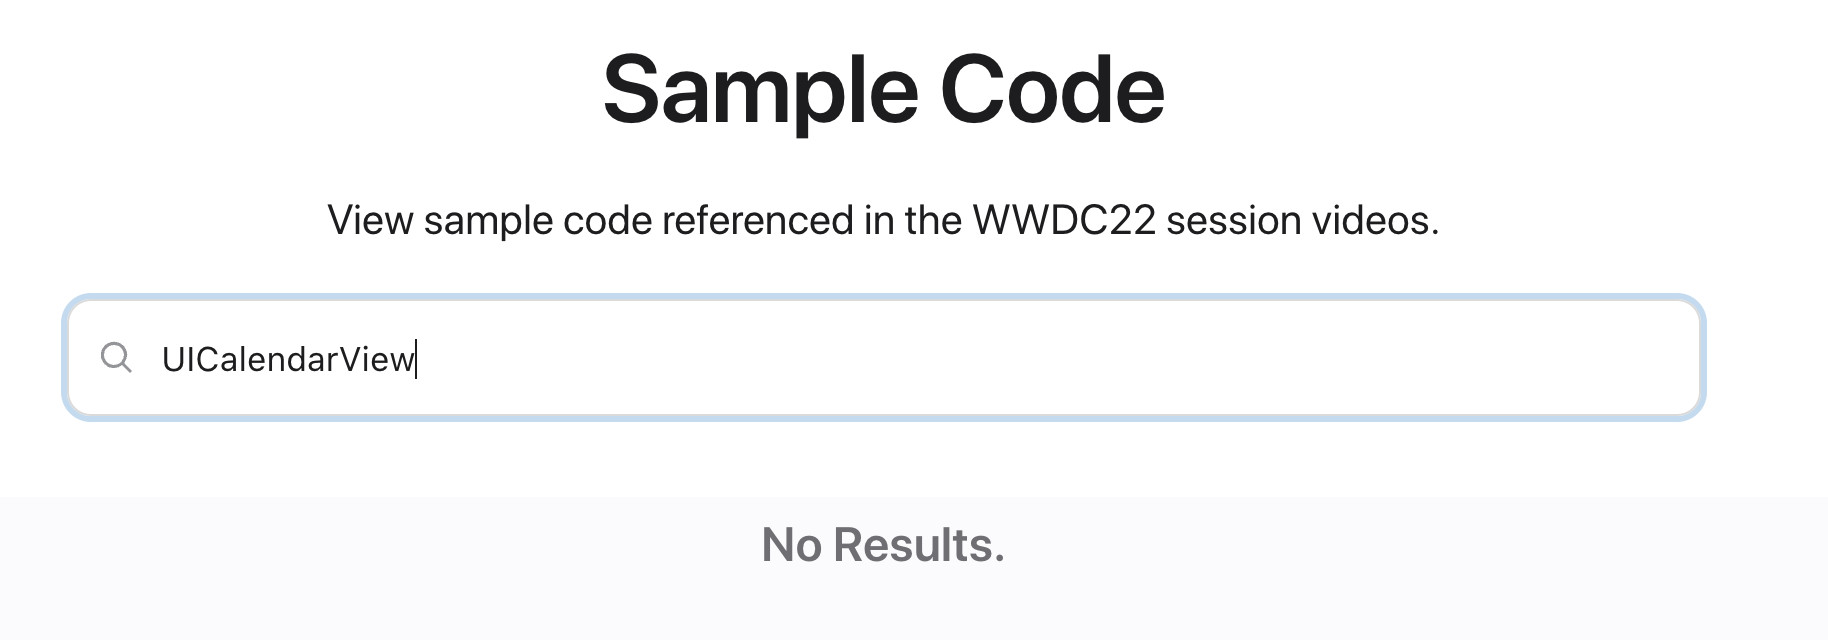 Sample Code. View sample code referenced in the WWDC22 session videos. UICalendarView. No Results.